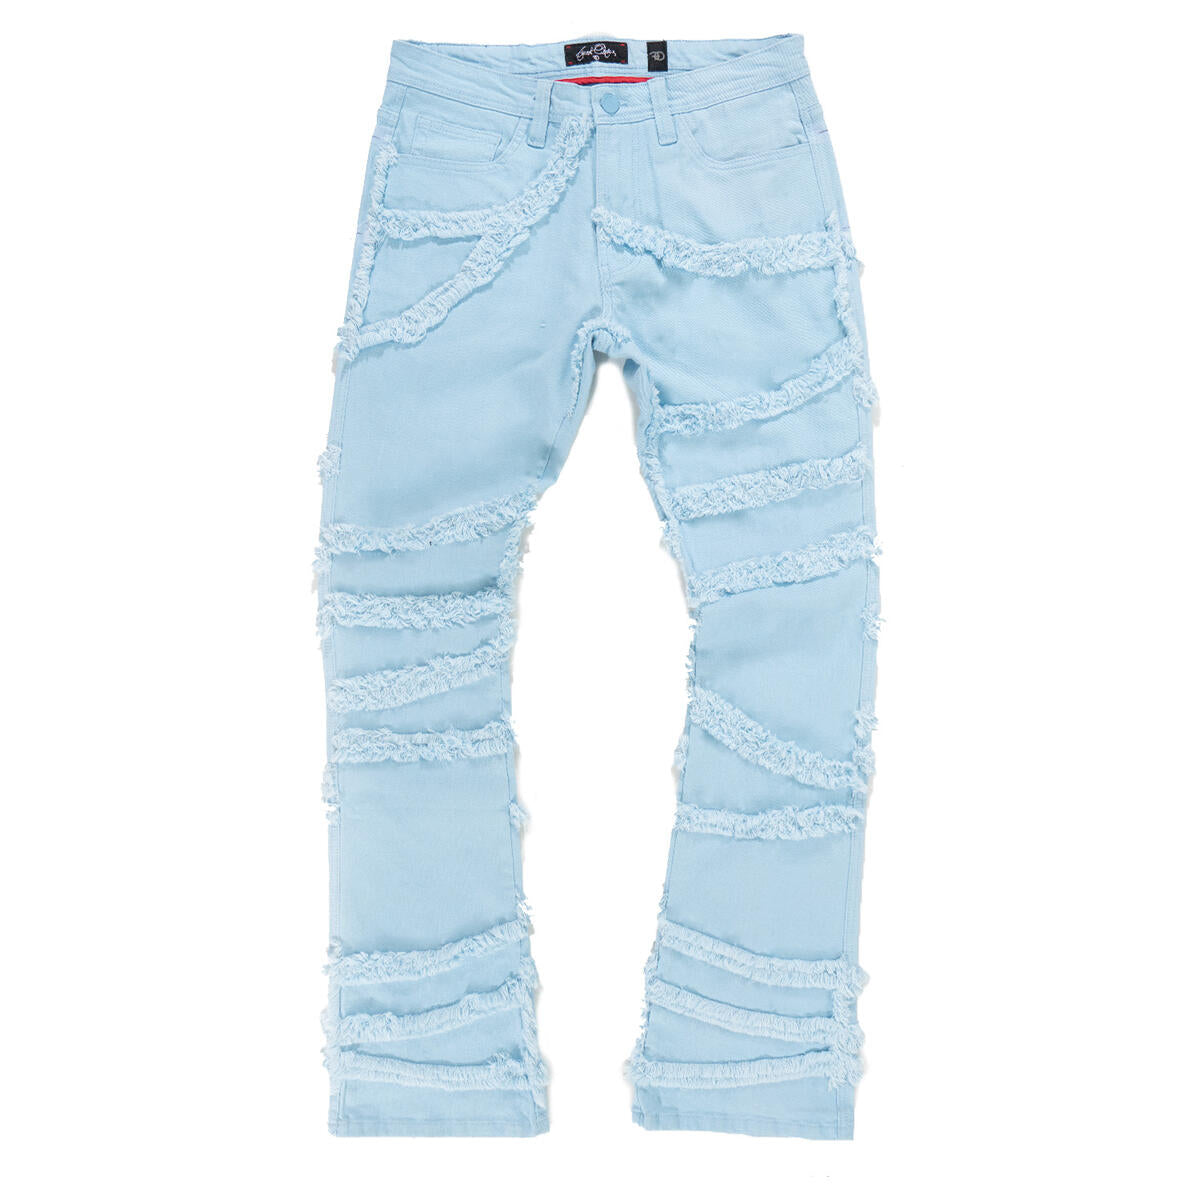 Leon Stacked Jeans - Light Blue - F1705